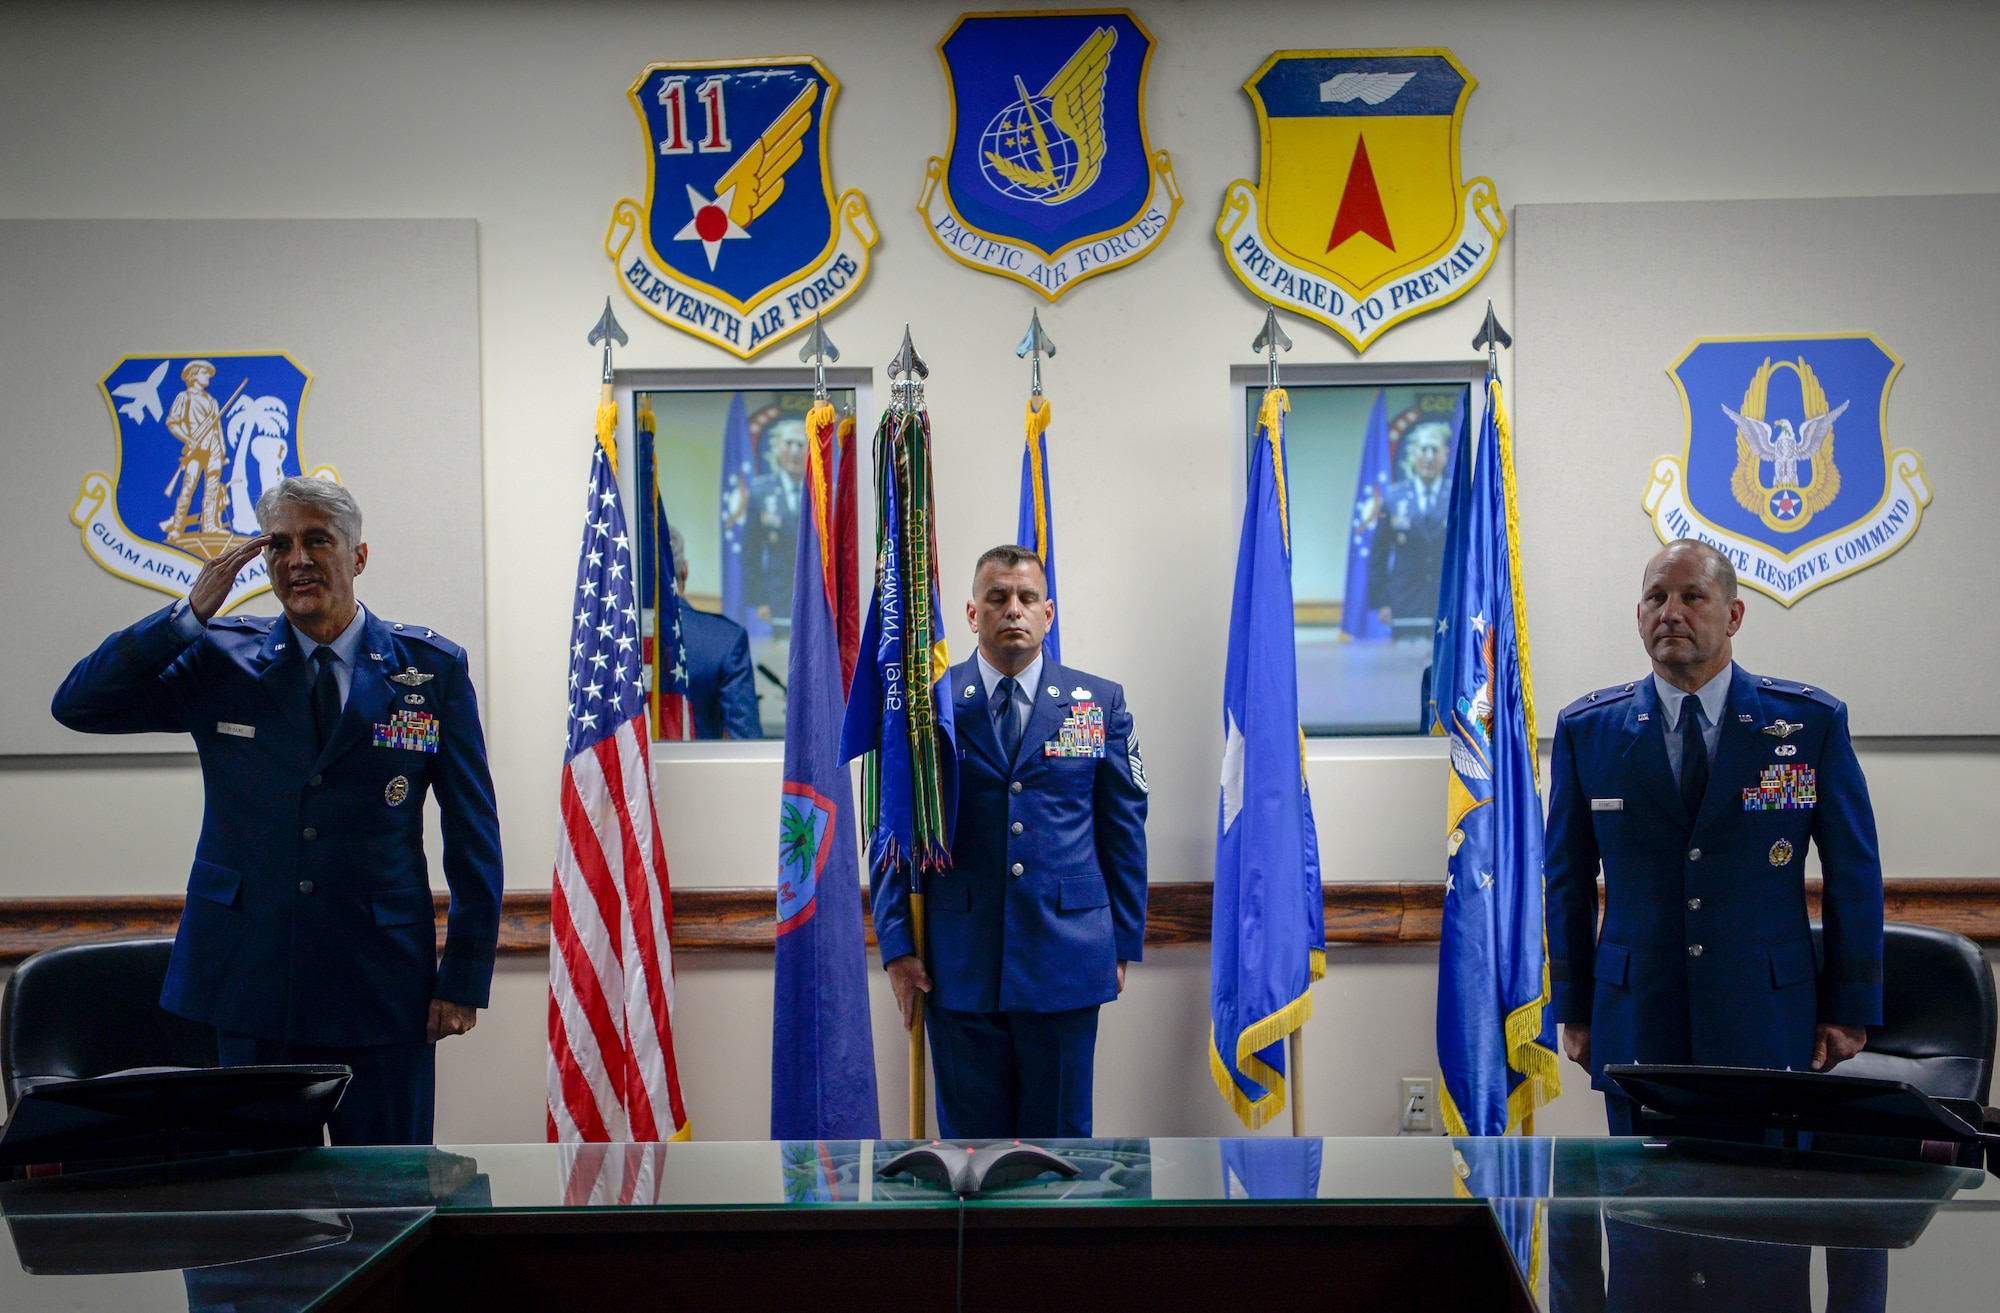 U.S. Air Force Brig. Gen. Jeremy T. Sloane takes command of the 36th Wing from outgoing commander, Brig. Gen. Gentry W. Boswell, during a change of command ceremony July 8, 2020, at Andersen Air Force Base, Guam.